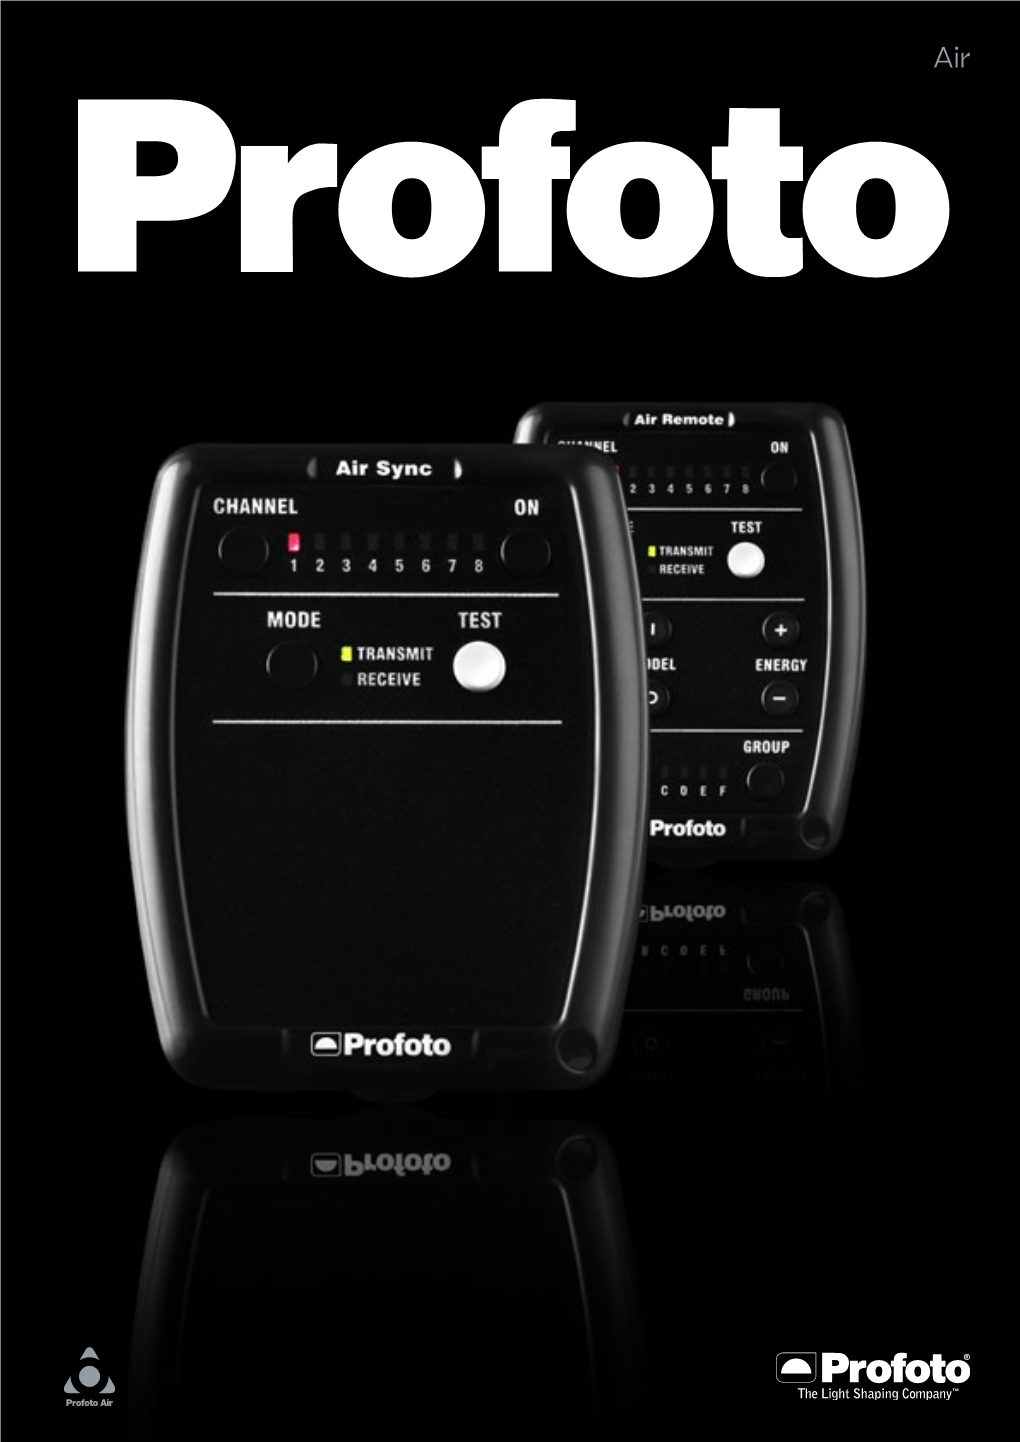 Wireless Camera Release and Flash Sync up to 1/1600 S with Profoto Air